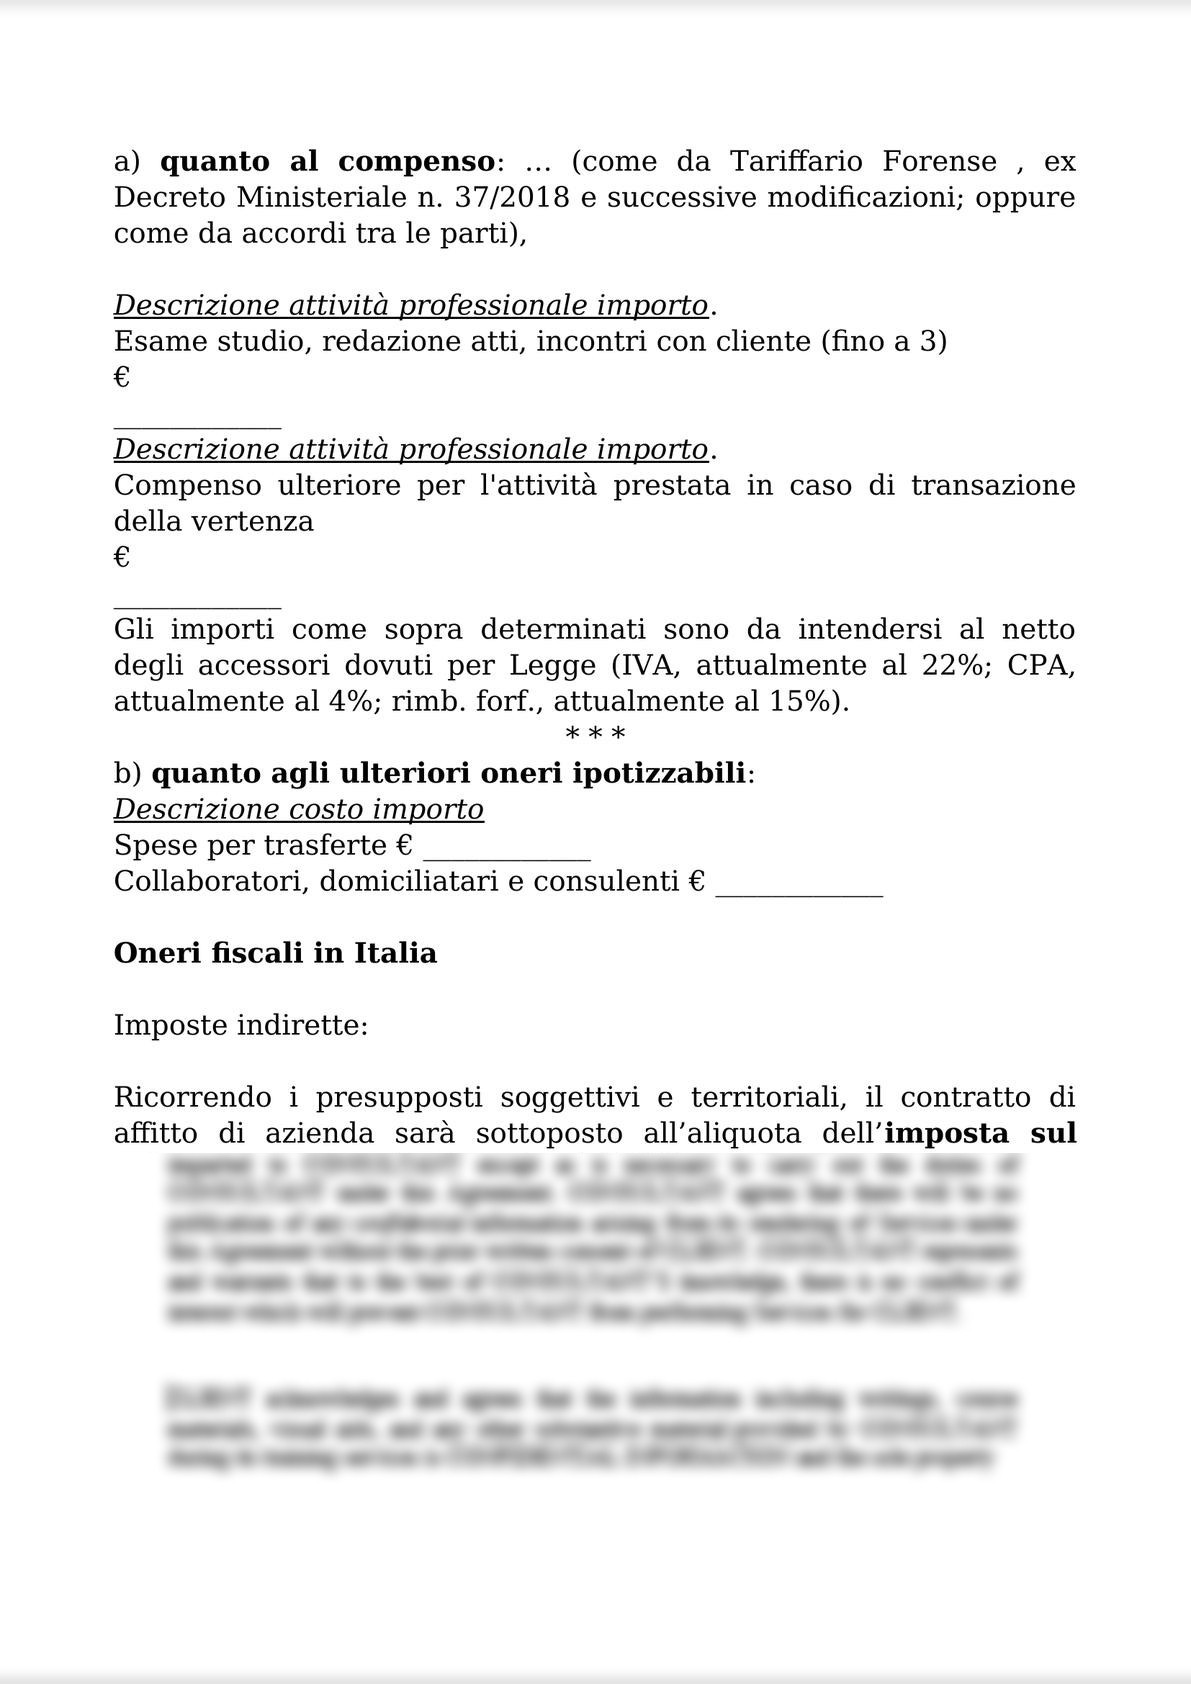 INTELLECTUAL WORK AGREEMENT FOR OUT-OF-COURT ACTIVITIES AND ATTACHMENTS 1 (PRIVACY); 2 (ANTI-MONEY LAUNDERING); AND 3 FEE QUOTE / CONTRATTO D’OPERA INTELLETTUALE STRAGIUDIZIALE-12